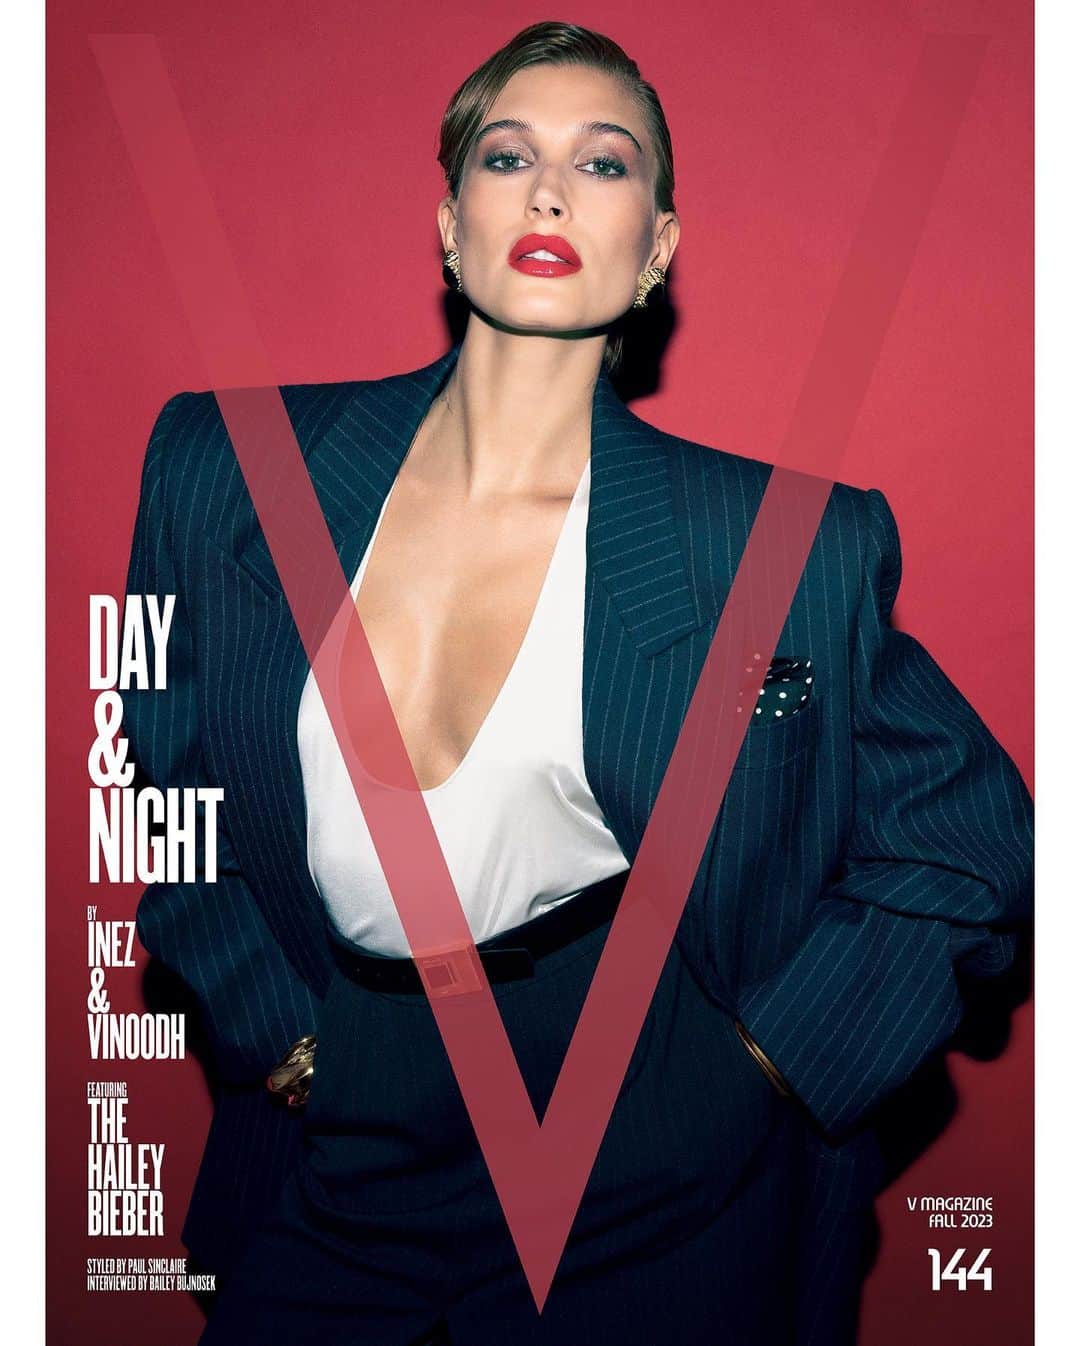 V Magazineさんのインスタグラム写真 - (V MagazineInstagram)「STRIKE A POSE—IT’S INEZ & VINOODH’S MODEL PARADE! 📸  Introducing our fall issue V144: Day & Night, a celebration of fashion, the art of modeling, and everything in between, featuring some of the leading faces in the game, photographed by @inezandvinoodh and styled by @paulsinclaire.  Cover 1 of 10: The @HaileyBieber, from the ballet studio to the photo studio. One of Hailey’s first tearsheets was in our ‘V GIRLS’ section inside the pages of the V92 Winter 2014 Issue! 9 years later, V would like to welcome Hailey back to open our fall fashion parade of current and next wave supermodels.  Before she was gracing the pages of top fashion glossies and walking the runway for designers, Hailey dreamed of being a ballerina. She trained at the prestigious American Ballet Theatre through her teen years, focusing all her energy on dance. Everything changed when a friend asked if she’d thought about modeling. After a test shoot with promising results, the New York native was enchanted by the experience and decided to swap her pointe shoes for photoshoots. Head to the link in our bio to discover the cover story now + pre-order your copy of V144 now at shop.vmagazine.com. — From V144 Fall 2023 Issue Model @haileybieber (@imgmodels) Photography @inezandvinoodh Fashion @paulsinclaire Creative Director / Editor-In-Chief #StephenGan Hair @jimmypaulhair (@susanpricenyc) Makeup @samvissermakeup (@artpartner) Manicure @deborahlippmann (@homeagency) Text @baileyabuj Editors @kalaherh @savsob  Production @michael.gleeson, #JohnNadhazi (VLM Productions) Special Thanks @luizmattos1906  [1] Hailey wears all clothing and accessories @ysl by @anthonyvaccarello [2] Hailey wears all clothing @balenciaga, ring her own  (This issue will be available on newsstands starting Wednesday, August 30.)」8月24日 21時59分 - vmagazine